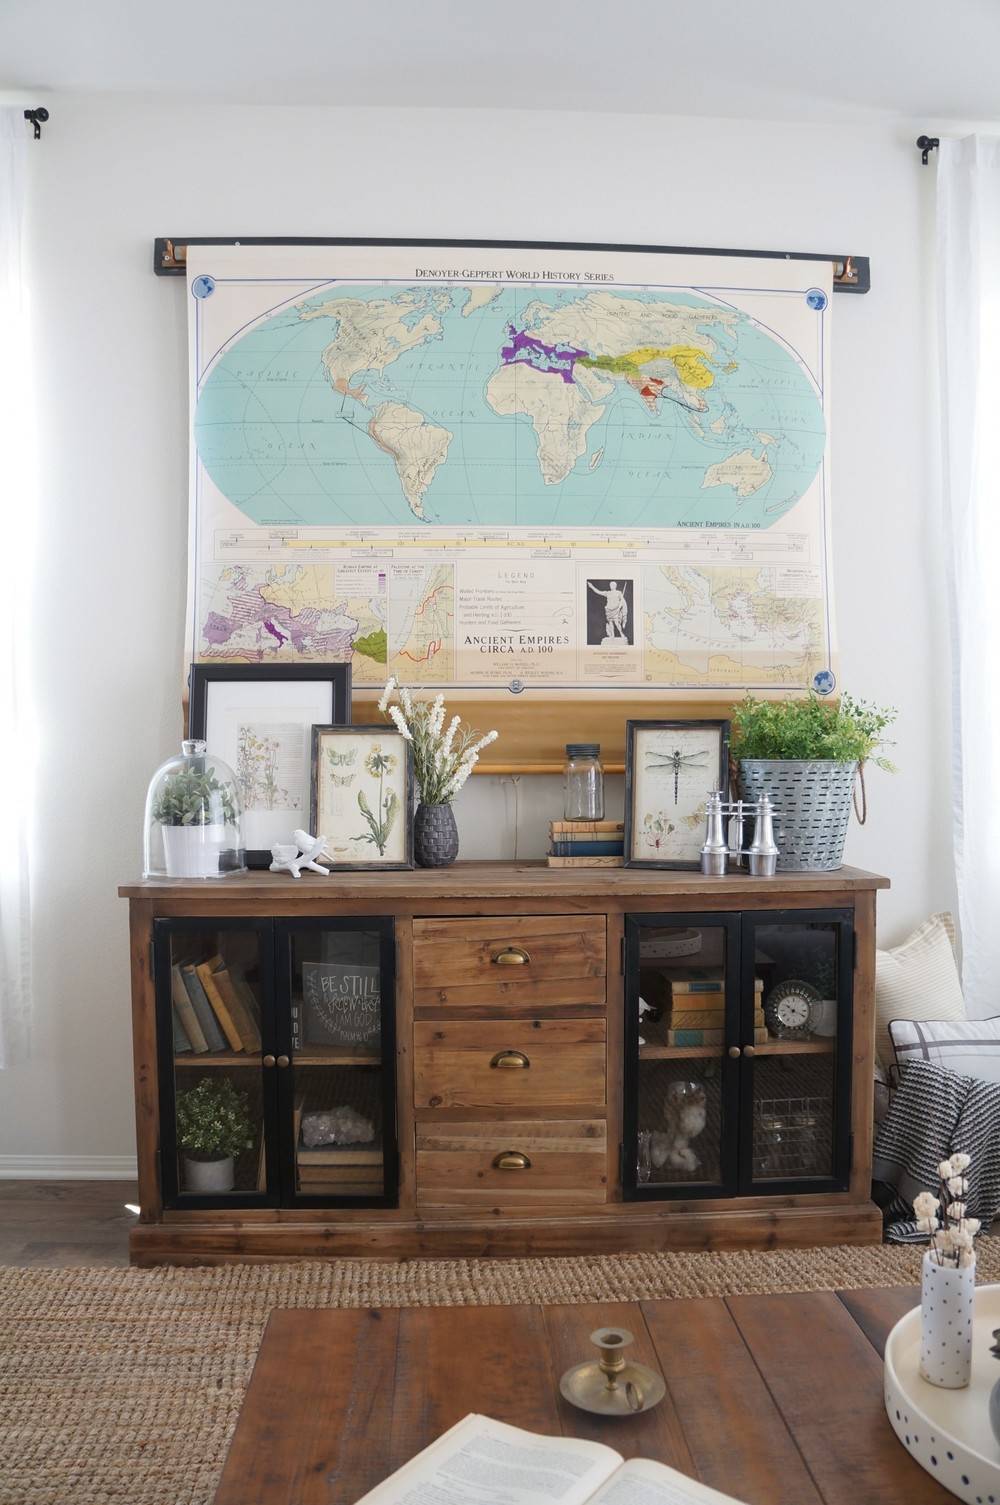 A full rustic bookshelf with drawers in the middle and picture frames on top sits under a world map.